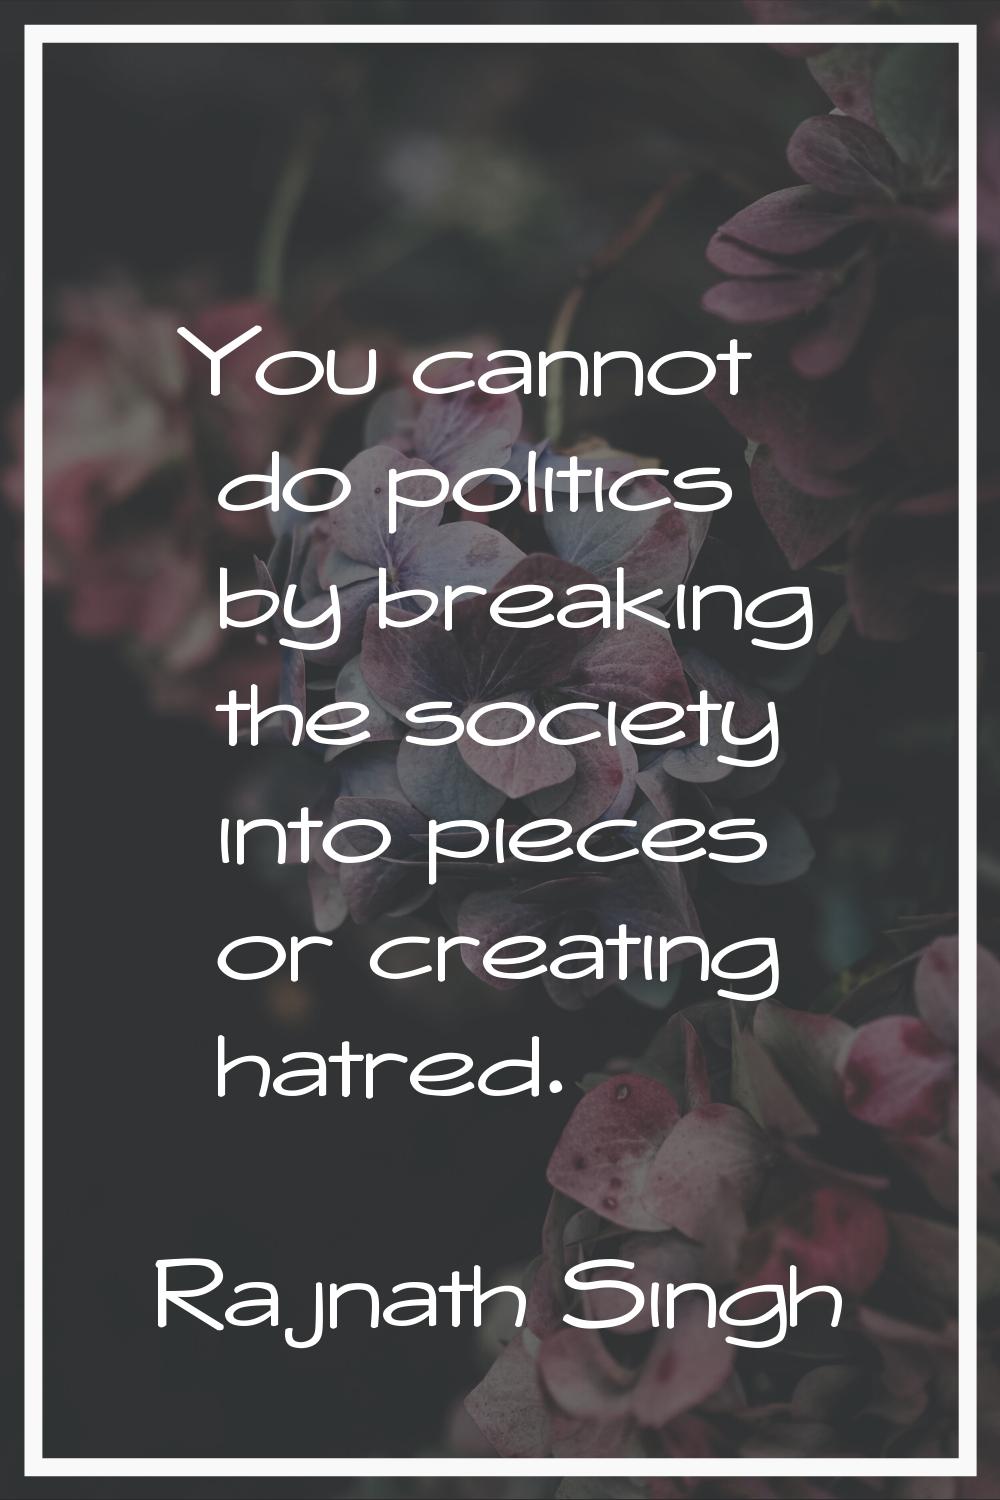 You cannot do politics by breaking the society into pieces or creating hatred.